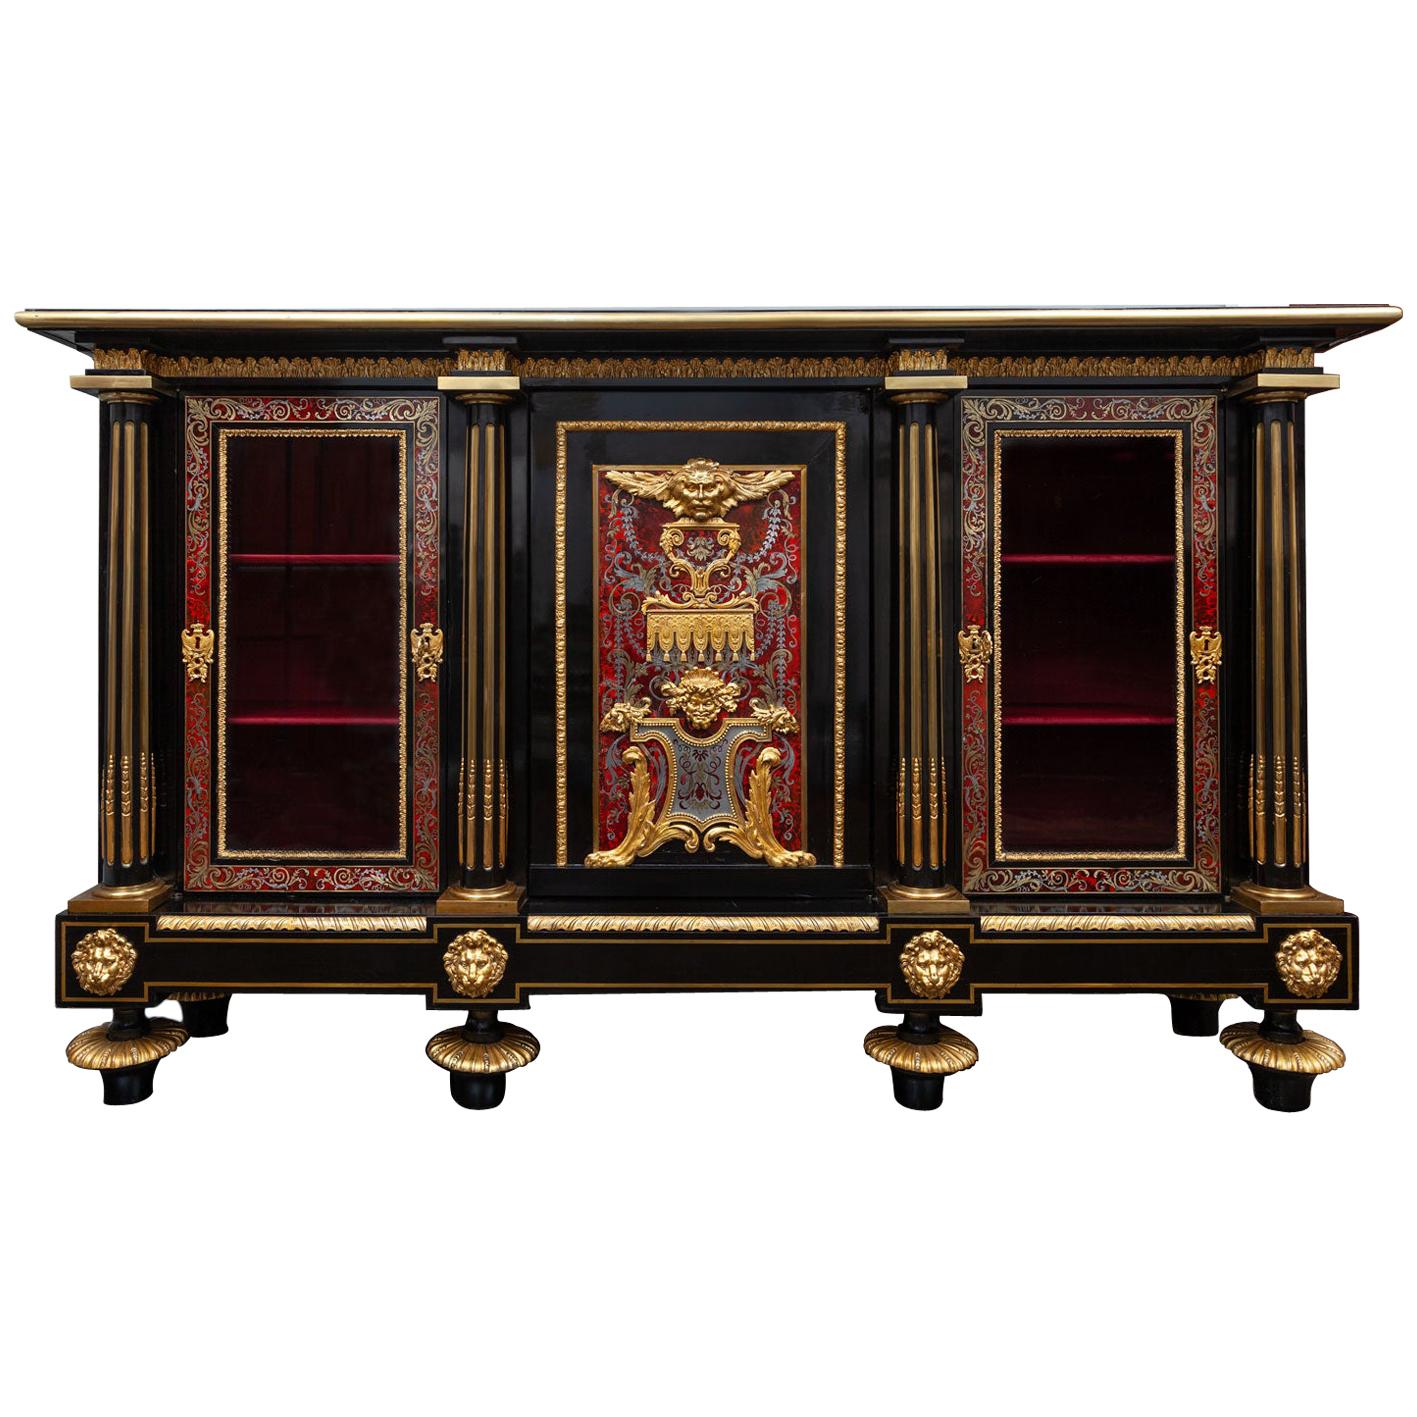 An important pair of early 19th century French cabinets, almost certainly made by Pierre-Étienne Levasseur.

gilt bronze mounted ebony and ebonised, cut-brass, pewter and faux tortoiseshell marquetry cabinets in the Boulle style. The rectangular top